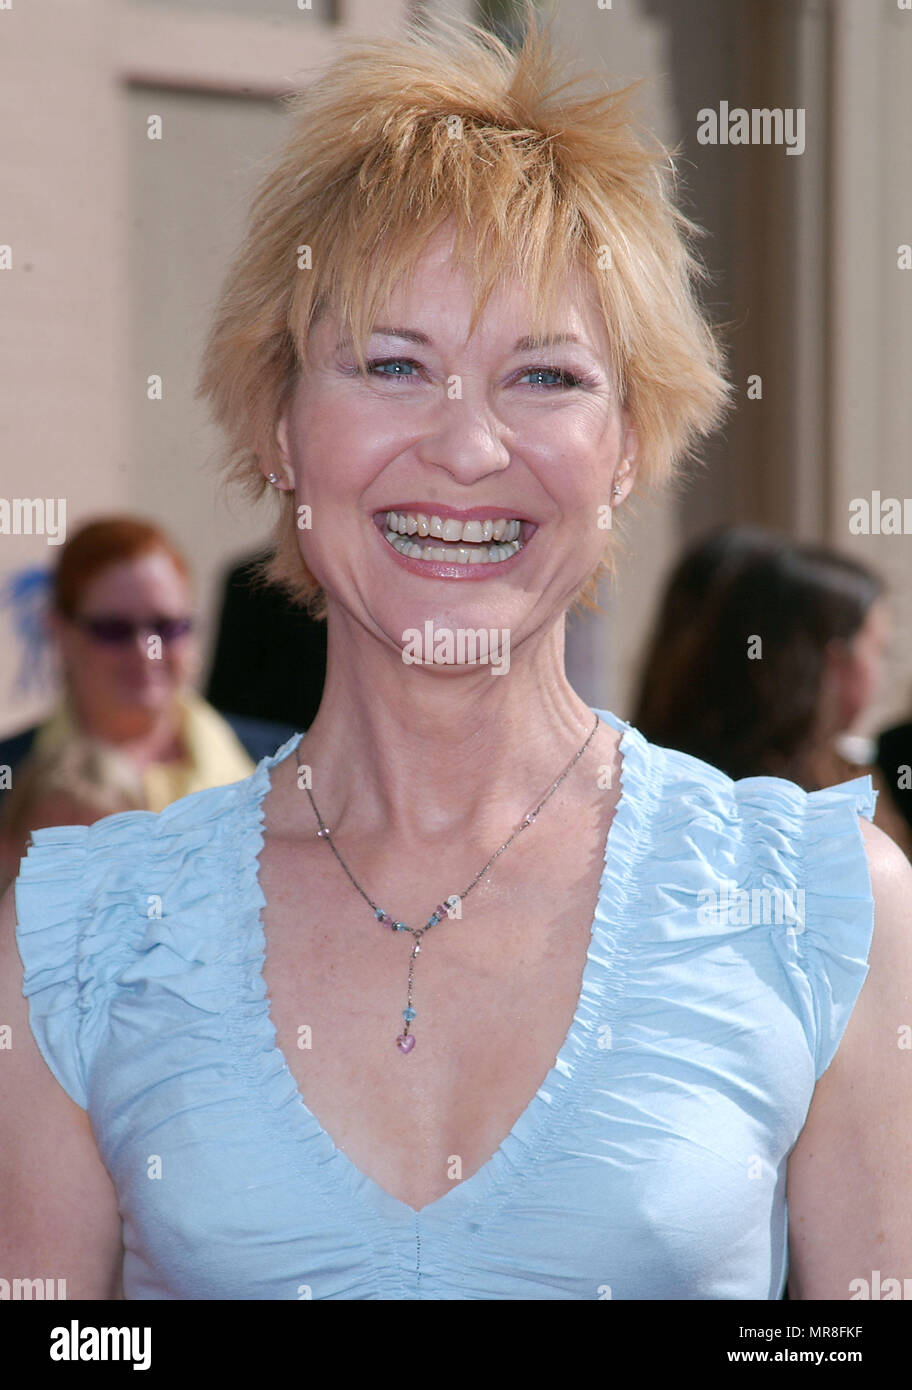 Dee Wallace Stone arriving at the 20th anniversary of the premiere of E.T. The Extra Terrestrial at the Shrine Auditorium in Los Angeles. March 16, 2002. WallaceStone_Dee10 Red Carpet Event, Vertical, USA, Film Industry, Celebrities,  Photography, Bestof, Arts Culture and Entertainment, Topix Celebrities fashion /  Vertical, Best of, Event in Hollywood Life - California,  Red Carpet and backstage, USA, Film Industry, Celebrities,  movie celebrities, TV celebrities, Music celebrities, Photography, Bestof, Arts Culture and Entertainment,  Topix, headshot, vertical, one person,, from the year , 2 Stock Photo